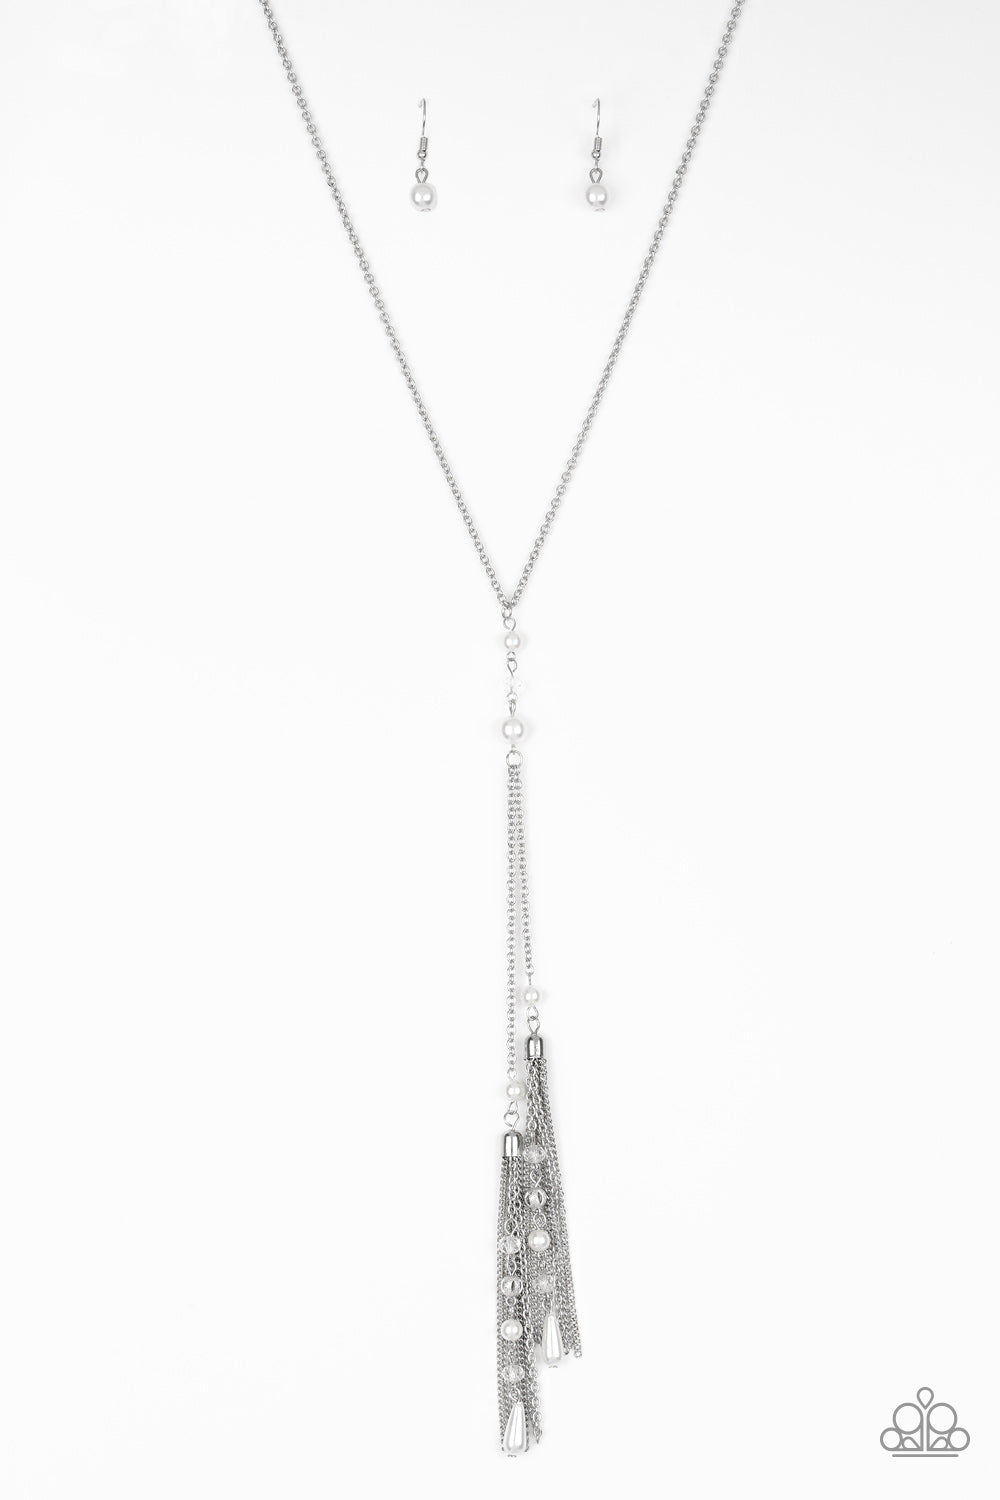 Timeless Tassels Silver Necklace - Paparazzi